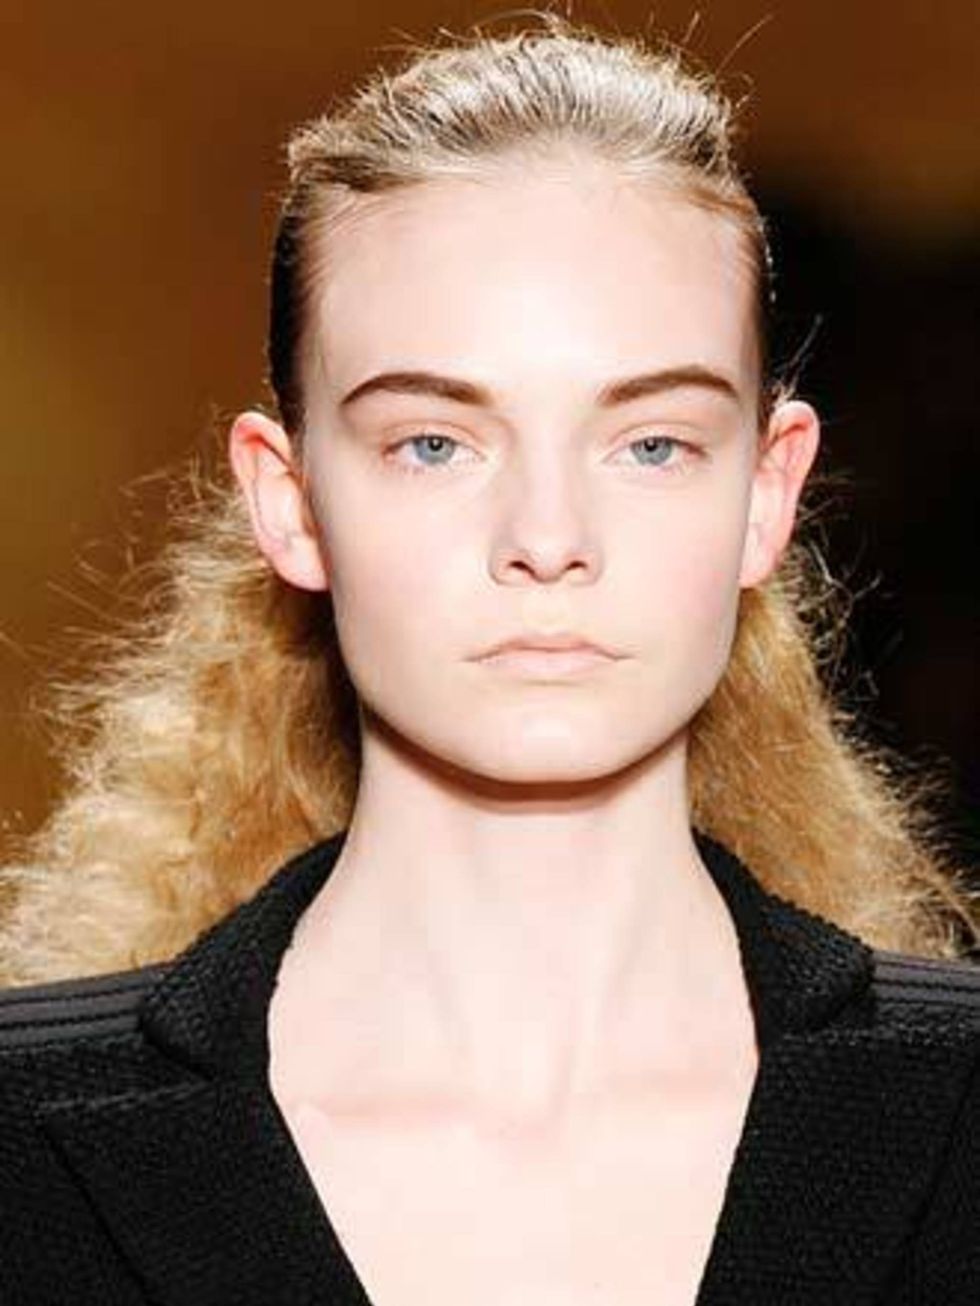 <p><strong>The Wild Bunch</strong></p><p>At hip designer Erin Fetherston hair was crimped and teased to recreate the eighties look of Londons new romantics. For Marc Jacobs too, hairstylist Guido took a trip back to the bad taste decade, creating a varie